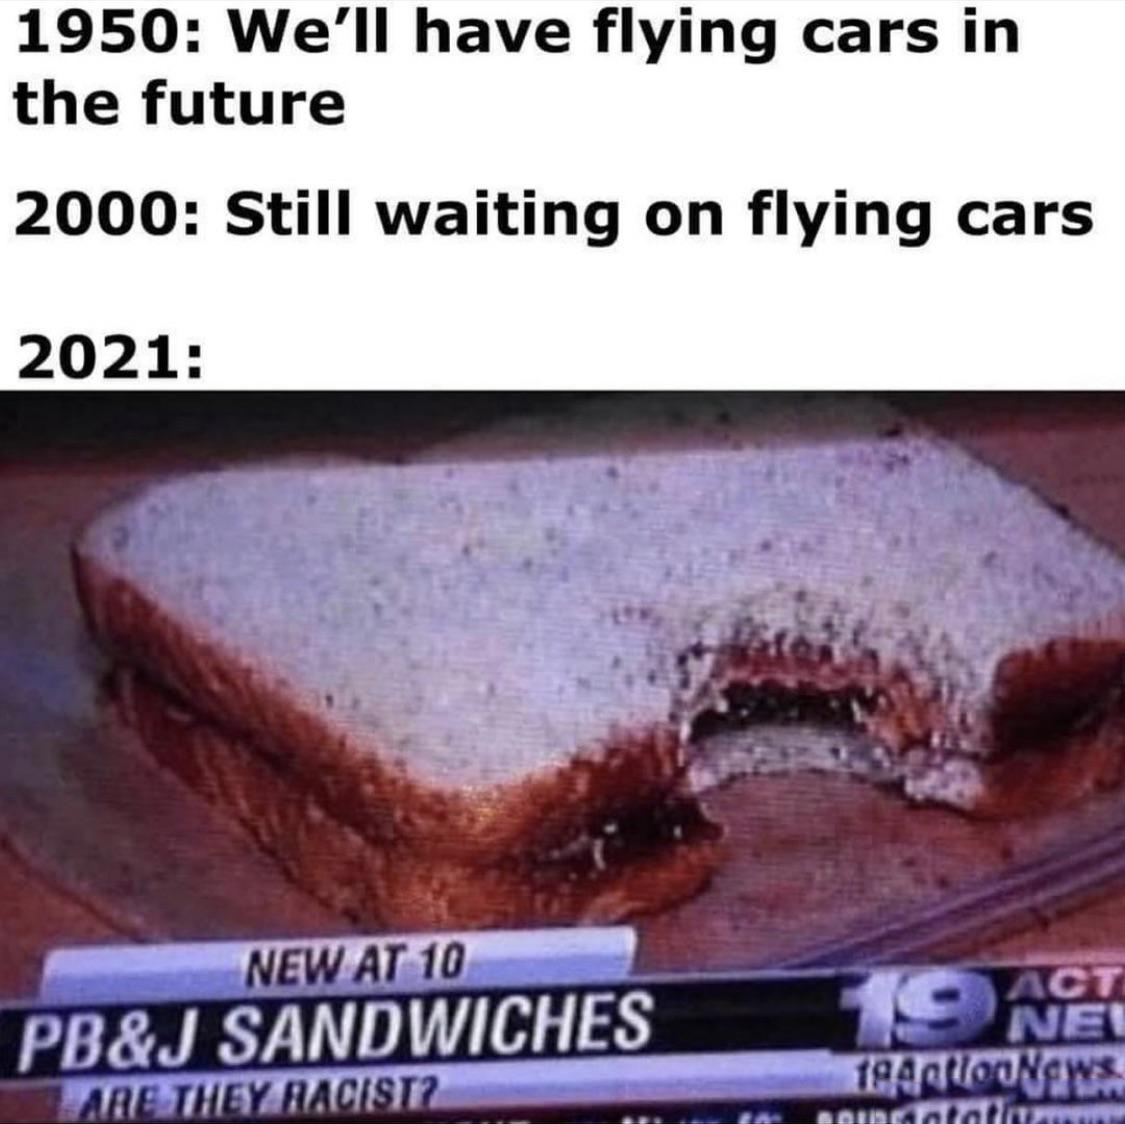 pb and j racist - 1950 We'll have flying cars in the future 2000 Still waiting on flying cars 2021 New At 10 Pb&J Sandwiches Are They Racist? Act Nel Tartoon una